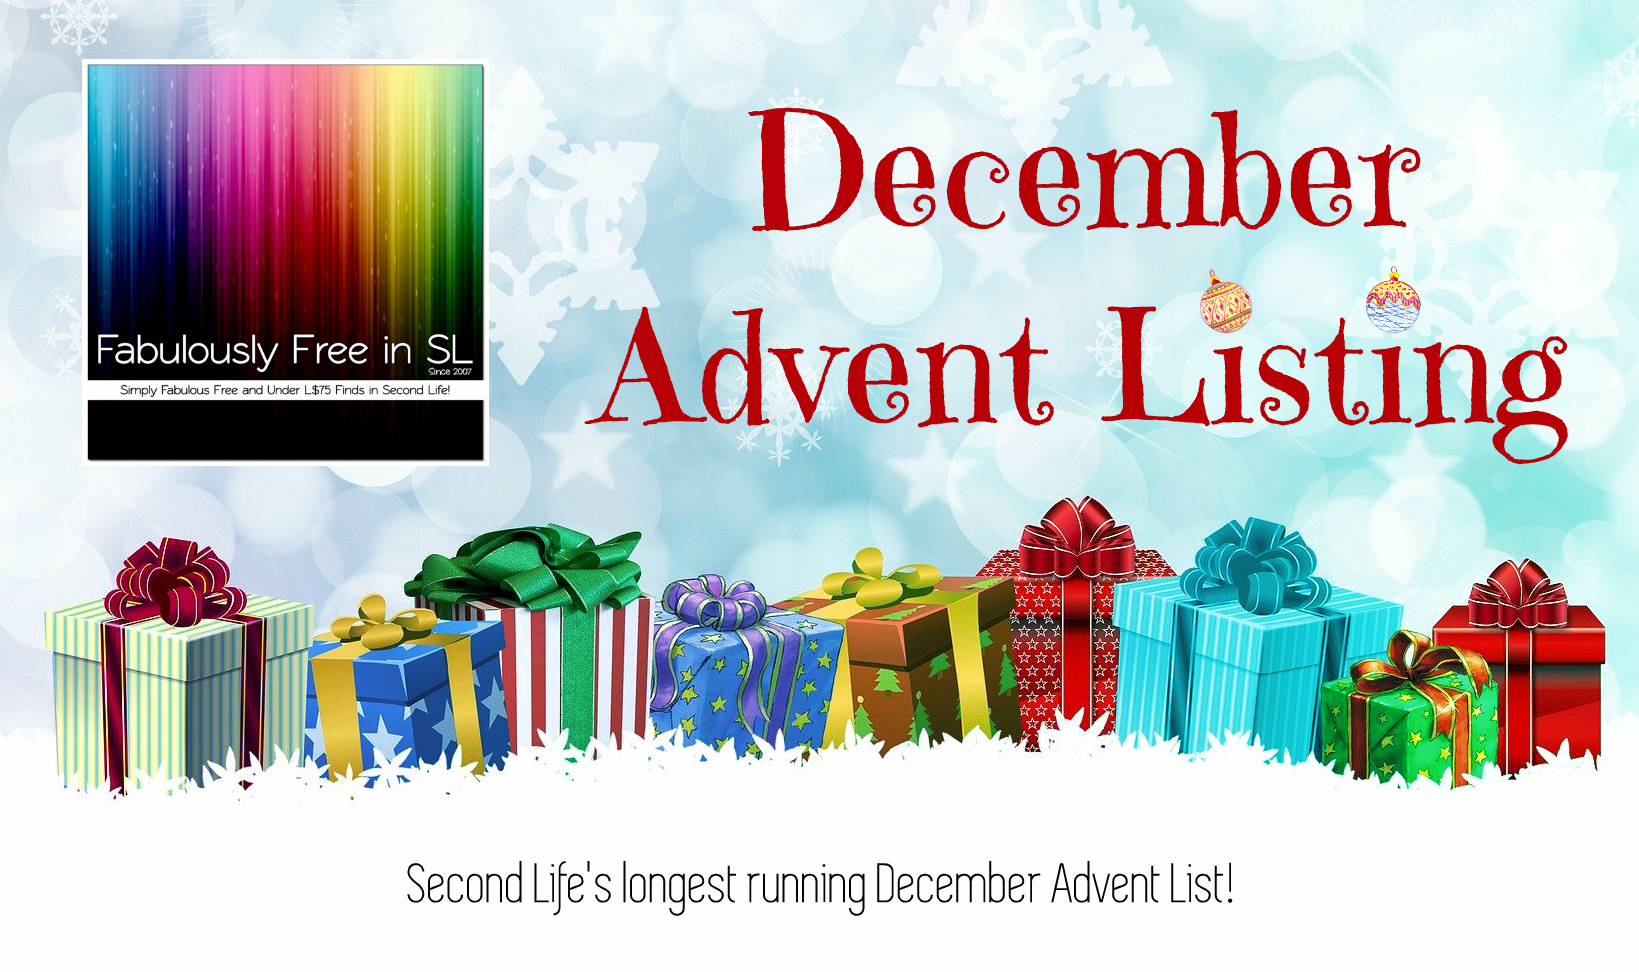 The FabFree December 2020 Advent Listing is Live!